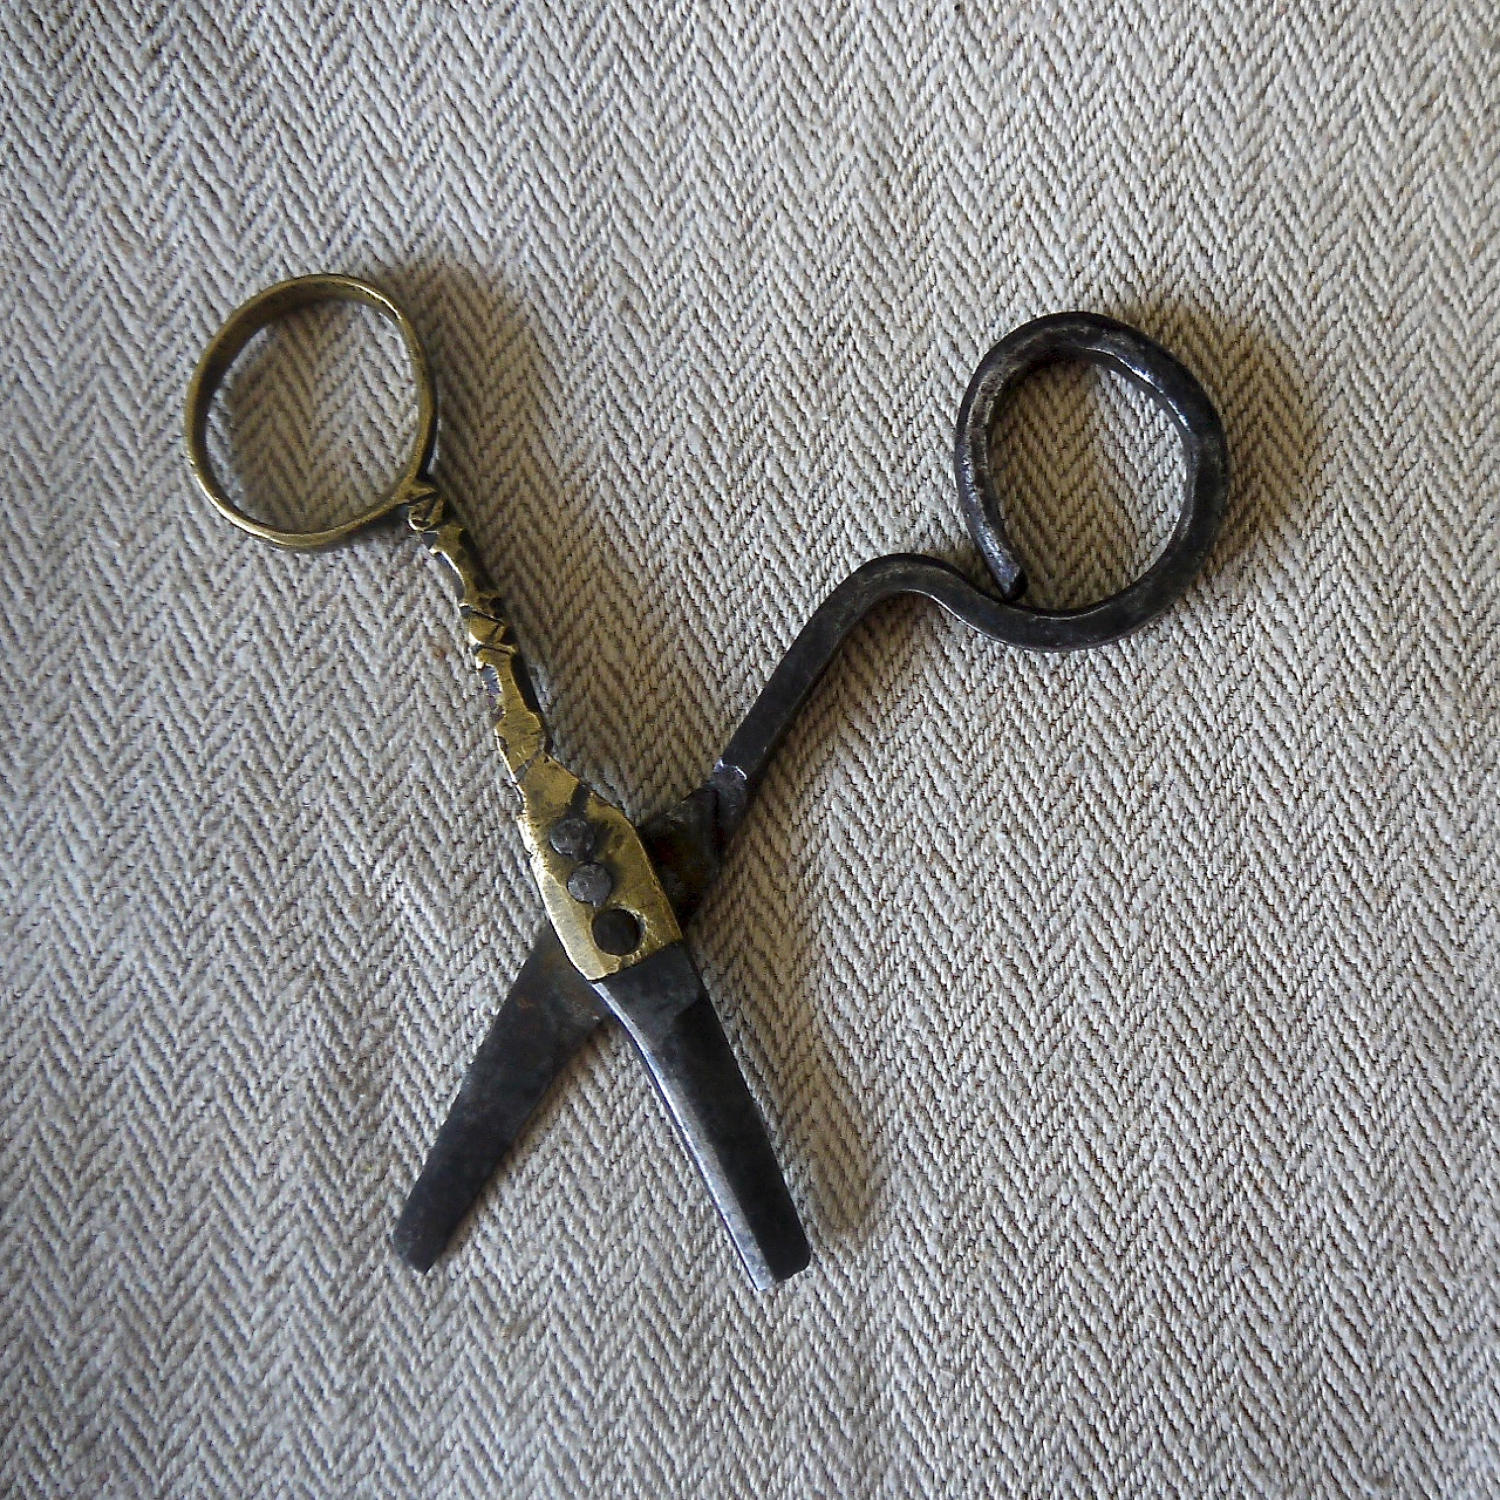 Small Pair of Brass and iron Scissors